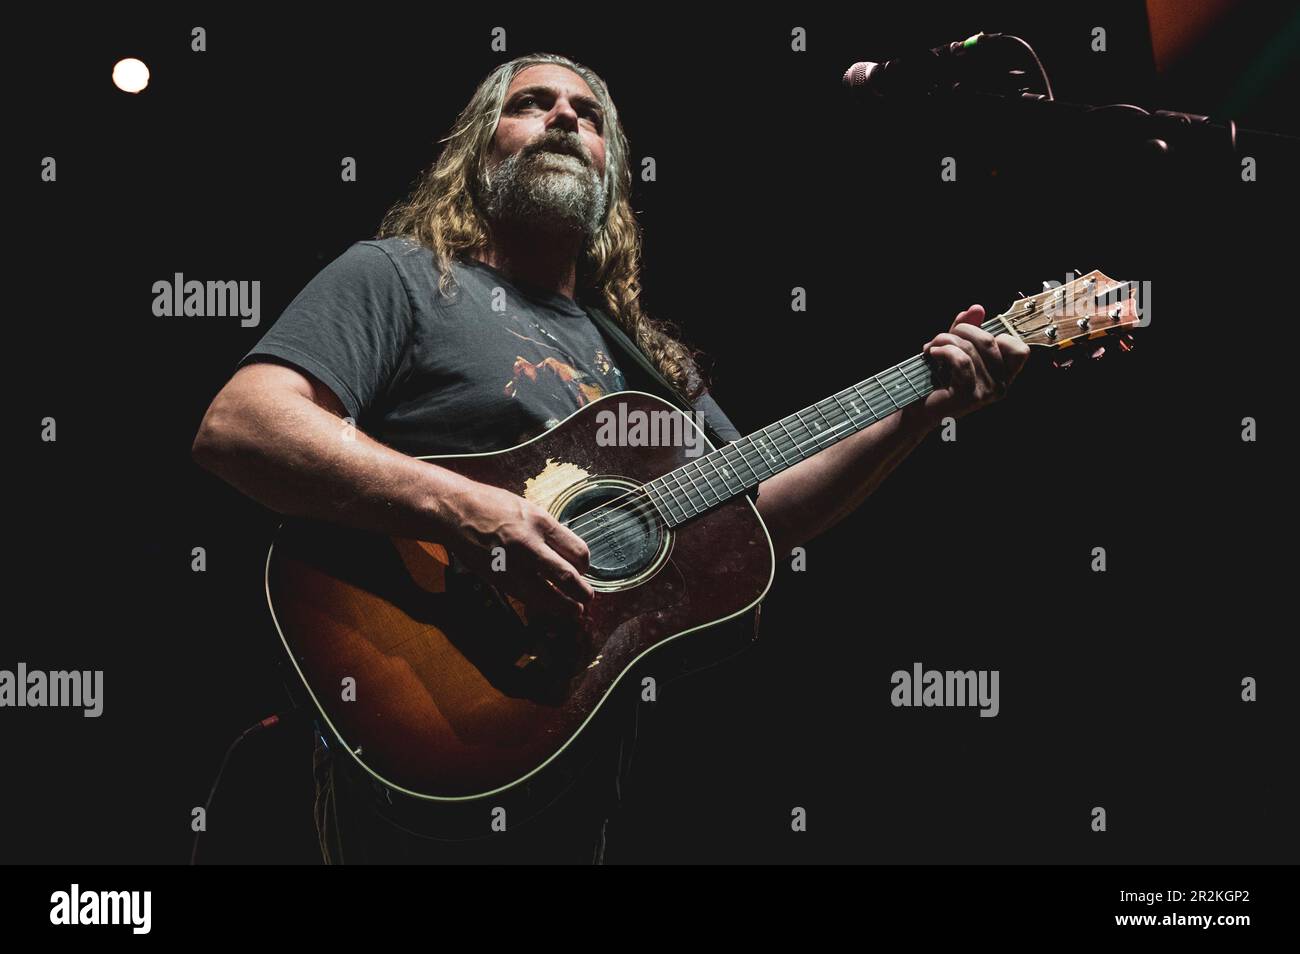 TURIN, ITALY: The White Buffalo (stage name of American musician and singer-songwriter Jake Smith) performing live on stage at the CAP10100 in Turin, for the “Year of the dark horse” tour Stock Photo